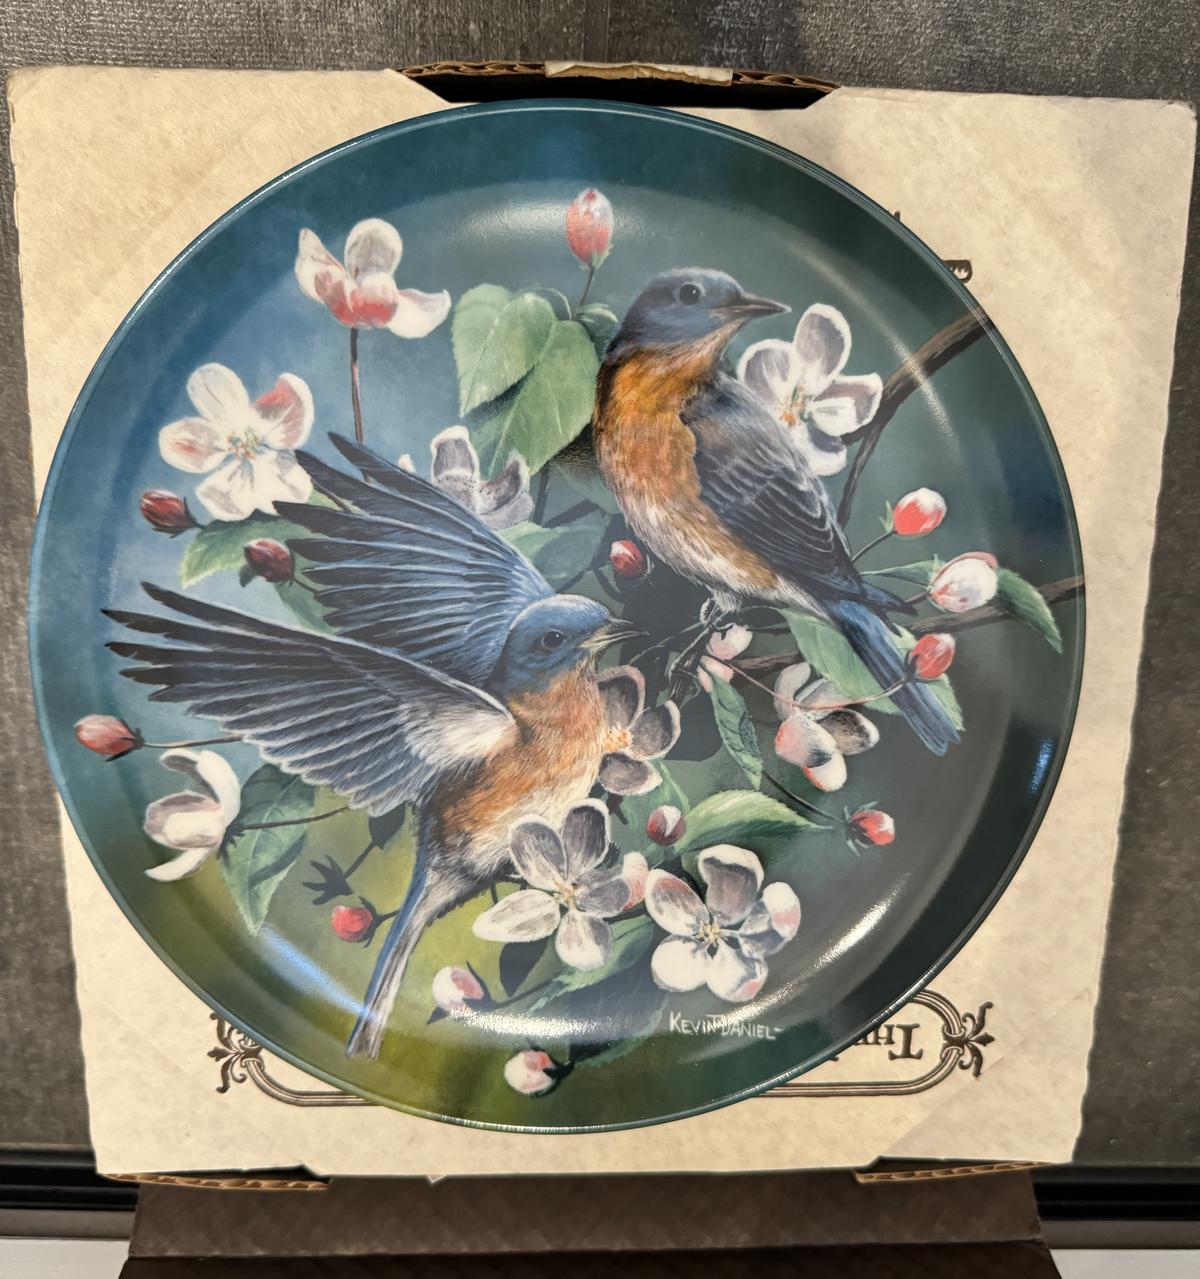 COLLECTIBLE CERAMIC PLATE - KEVIN DANIEL PAINT - IN ORIGINAL BOX WITH PAPERS